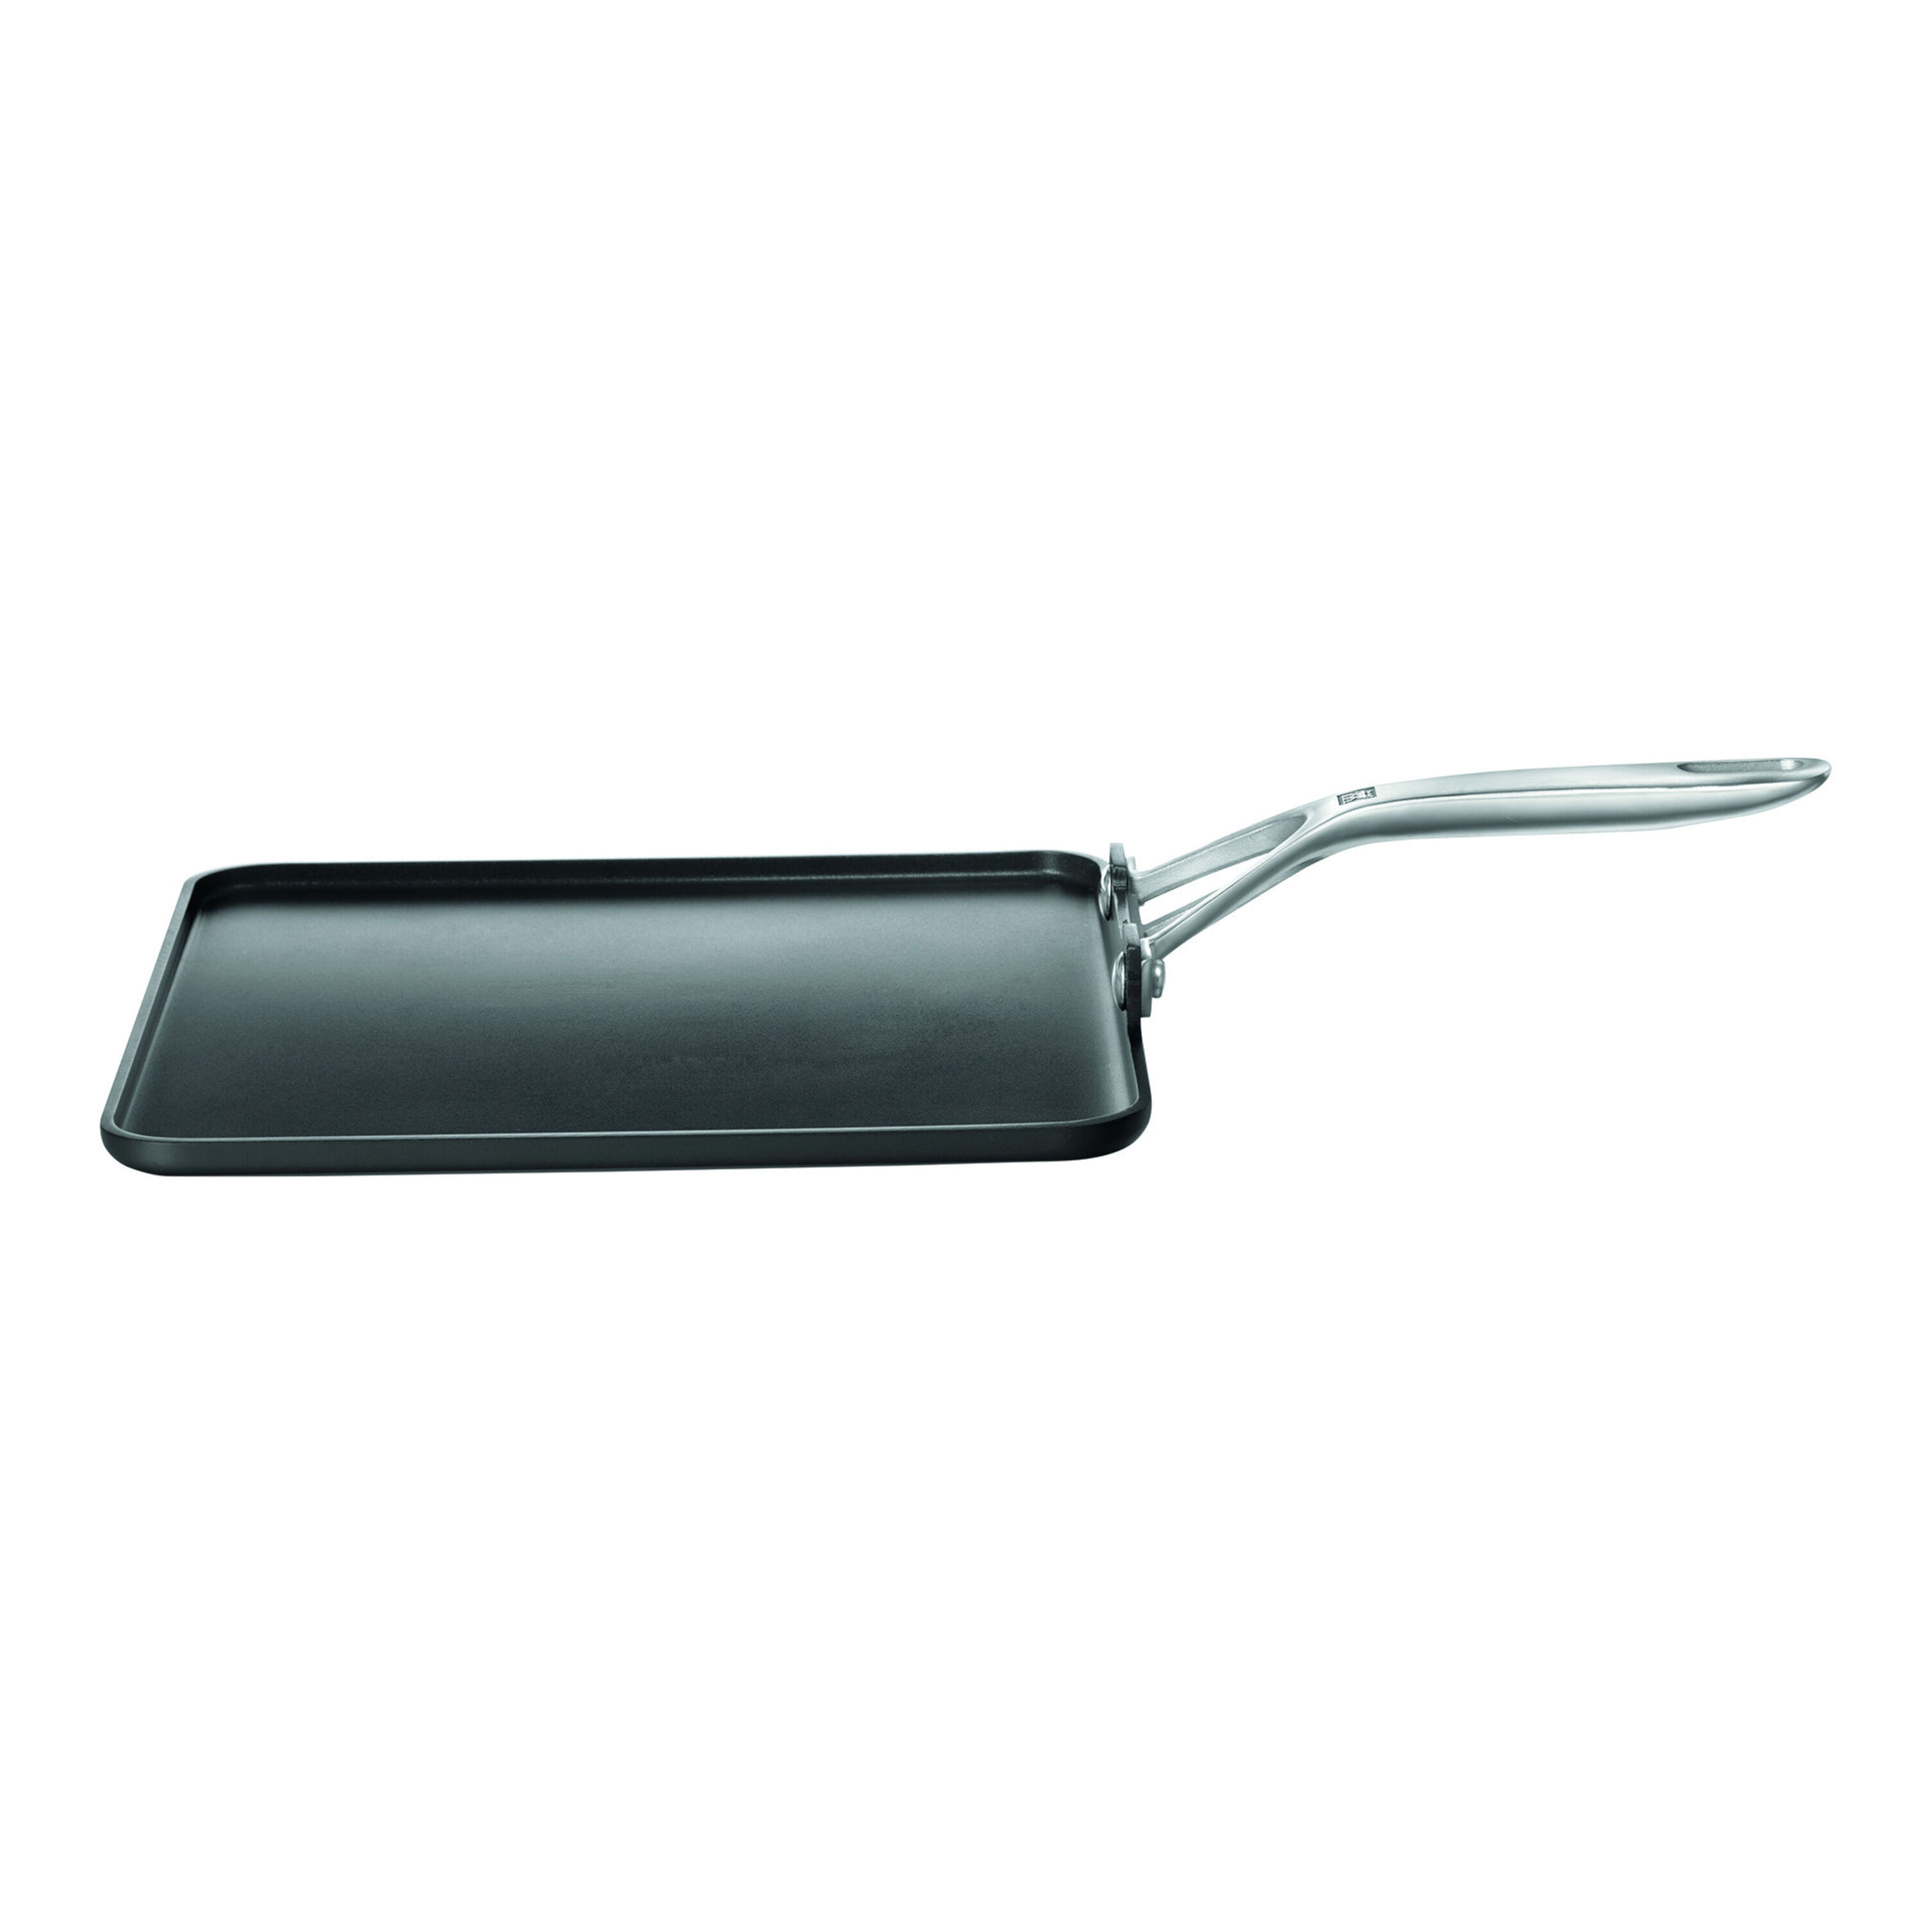 11 Inch Classic Non-stick Square Fry Pan – Not a Square Pan